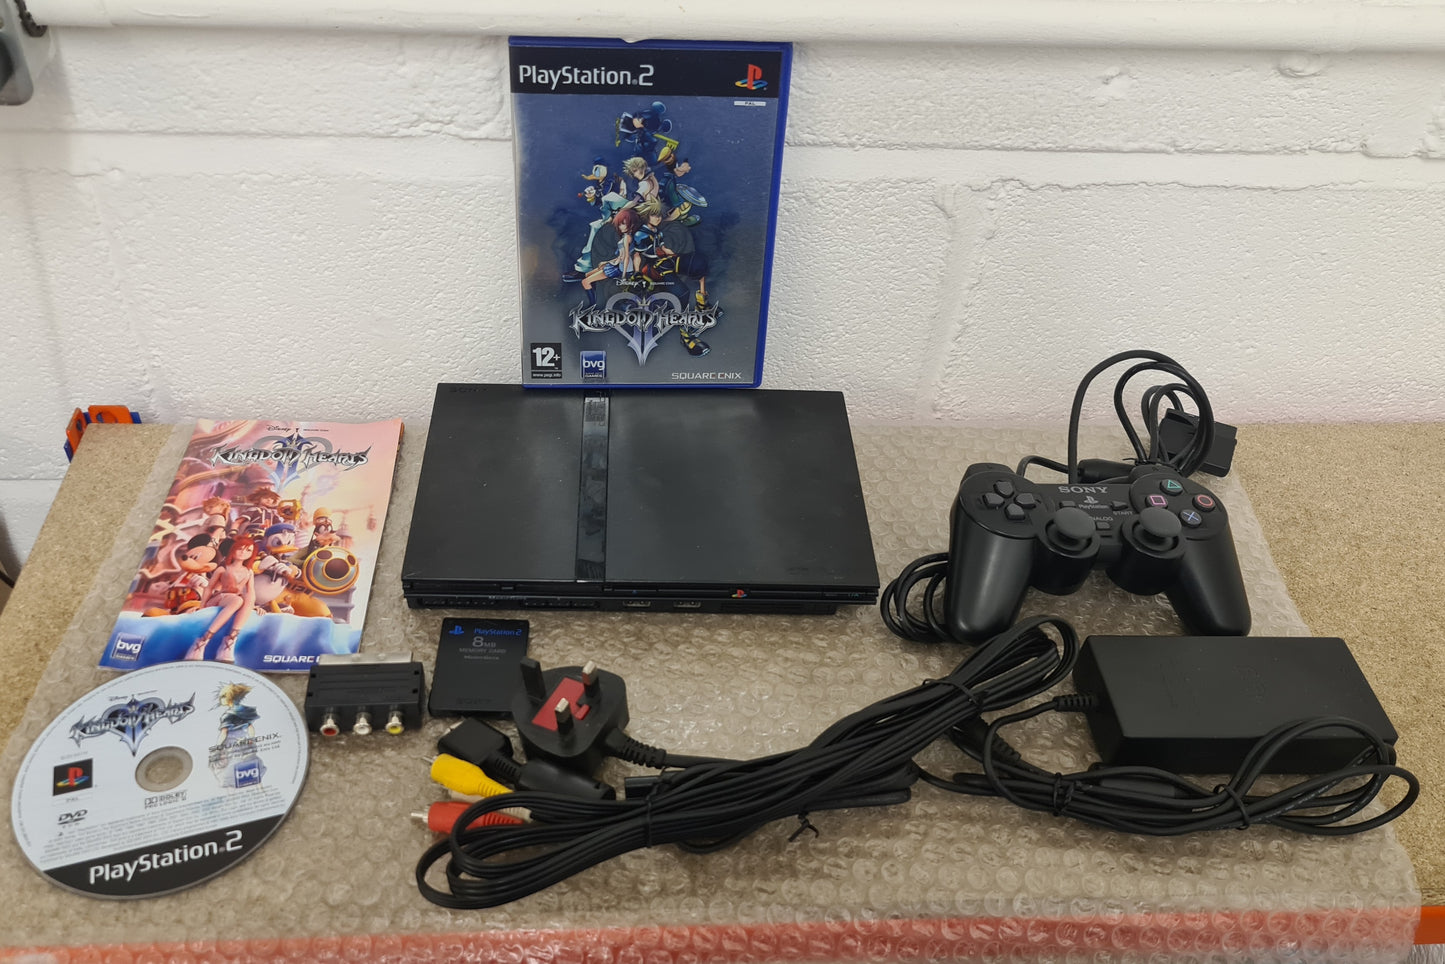 Sony Playstation 2 Slim Console SCPH 79003 with 8 MB Memory Card & Kingdom Hearts in Custom Gift Box